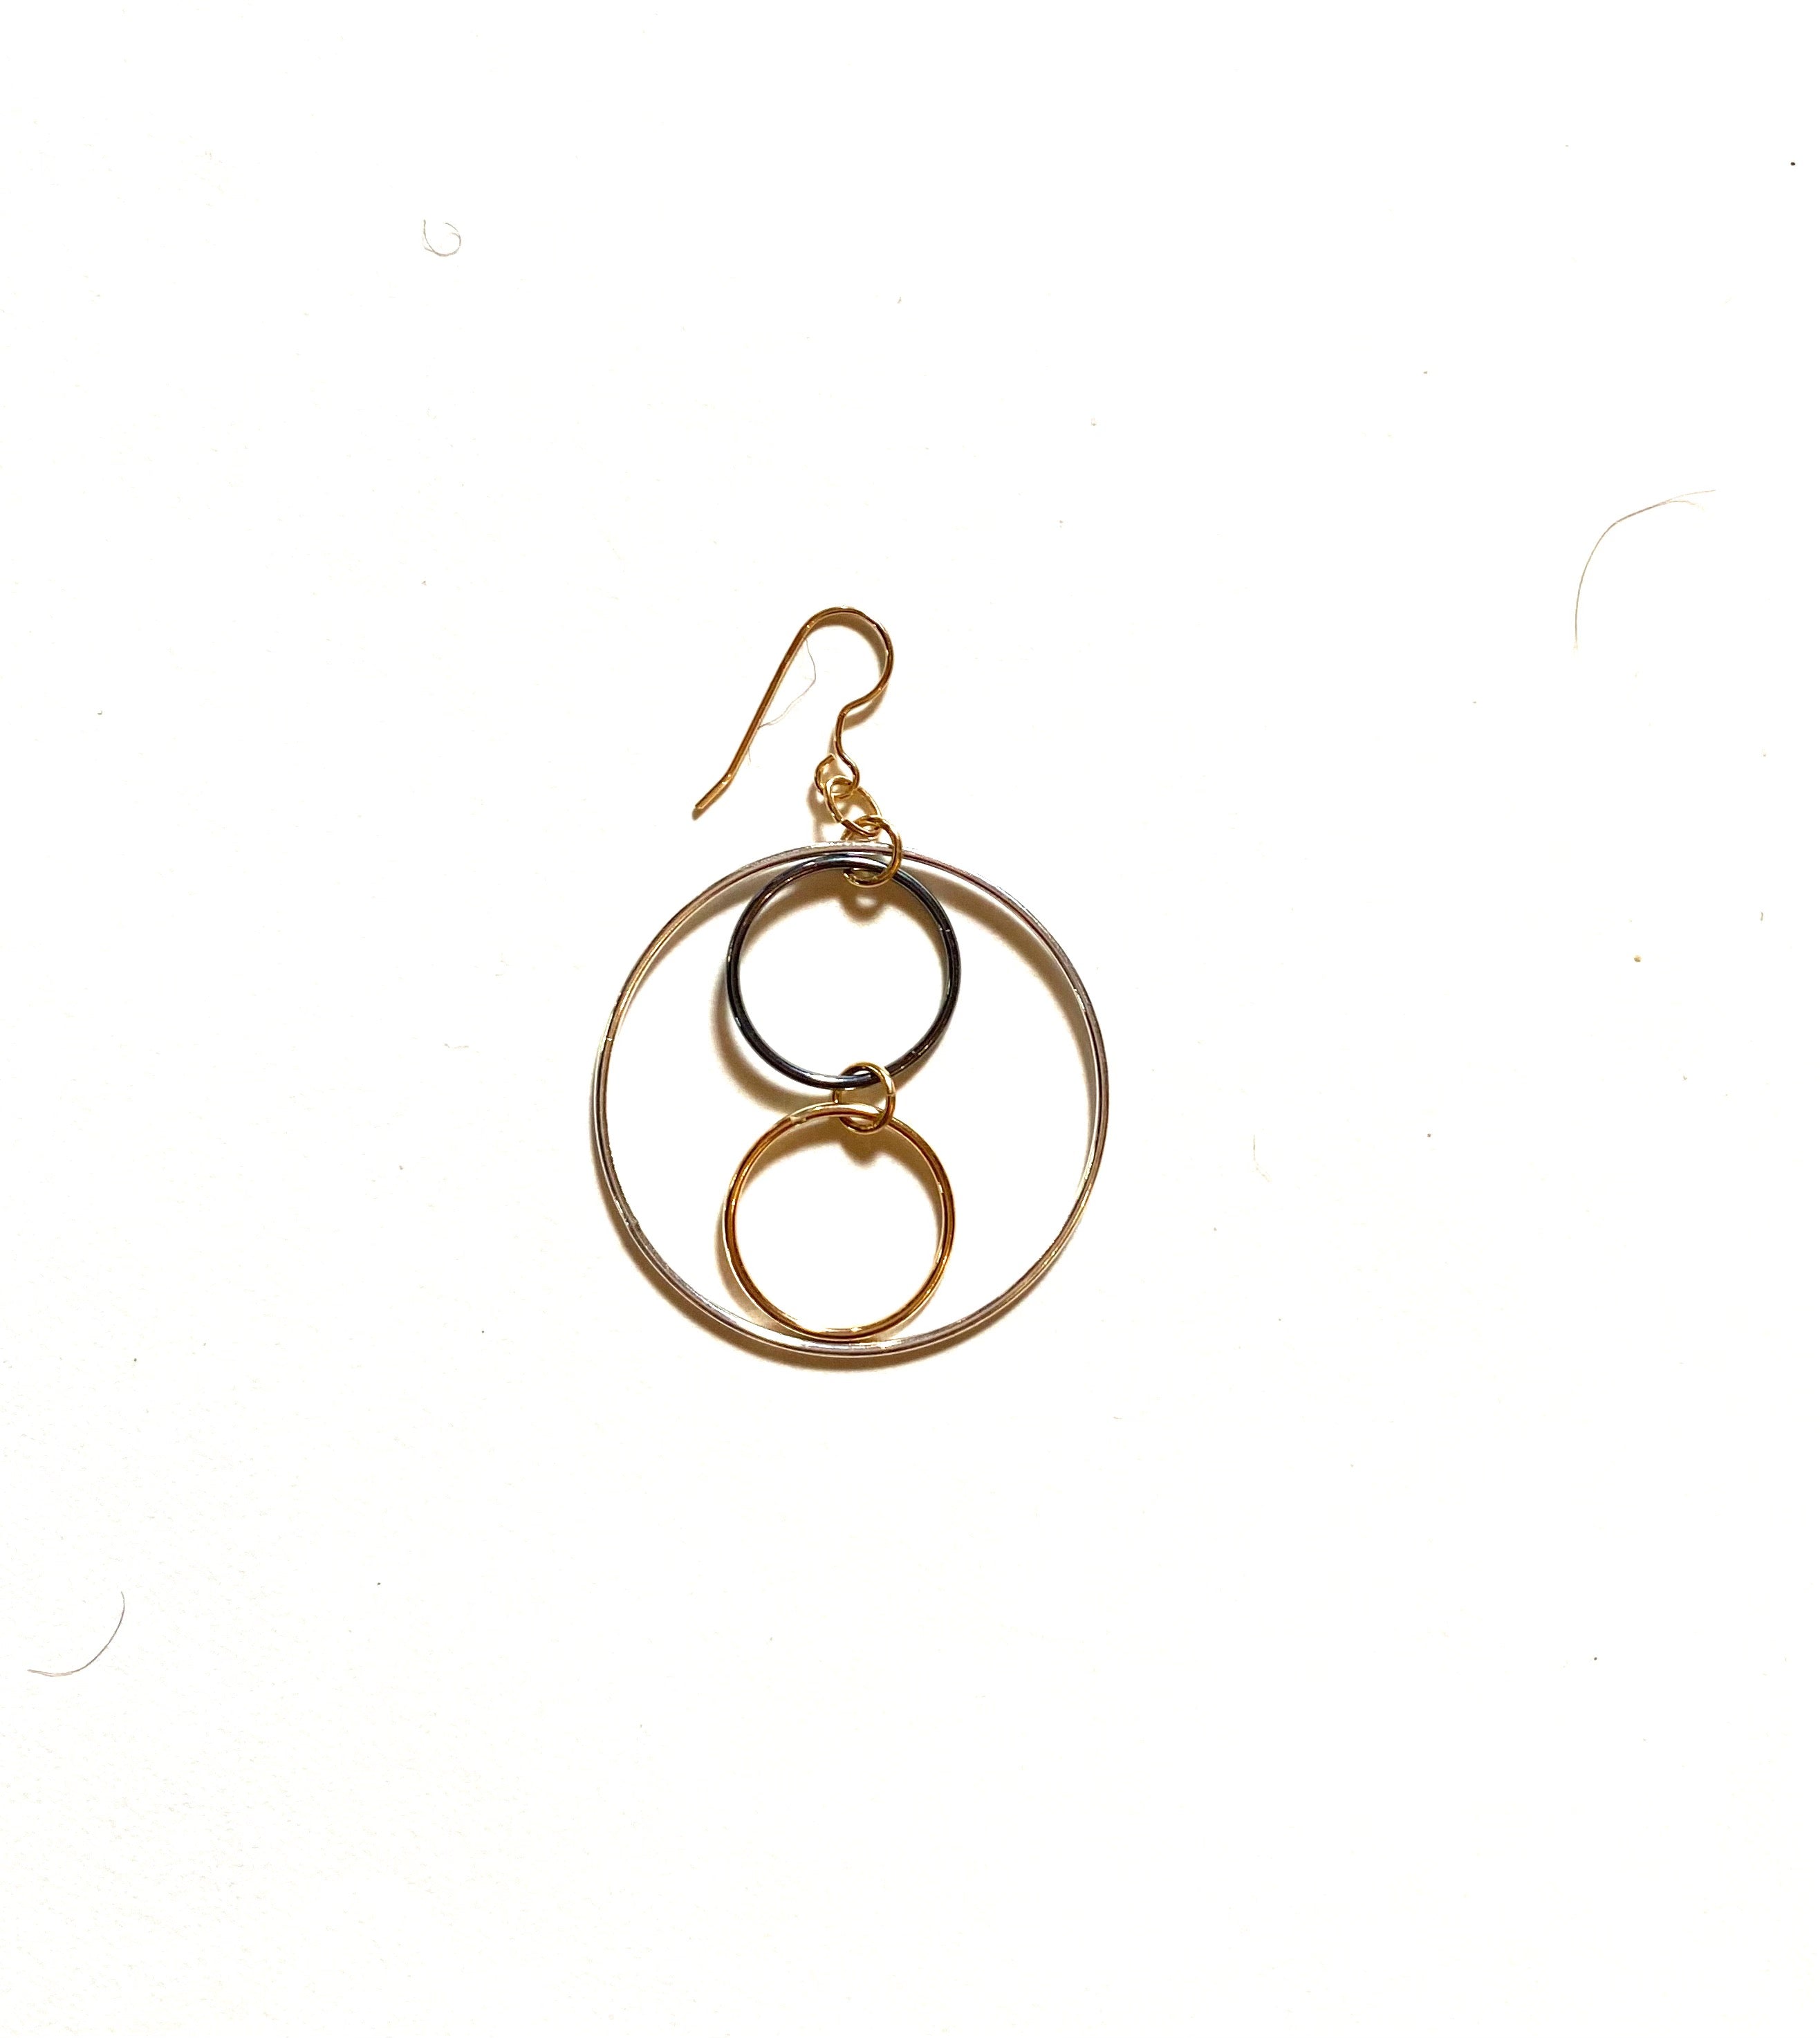 Mars - earrings of sterling silver and gold filled circles